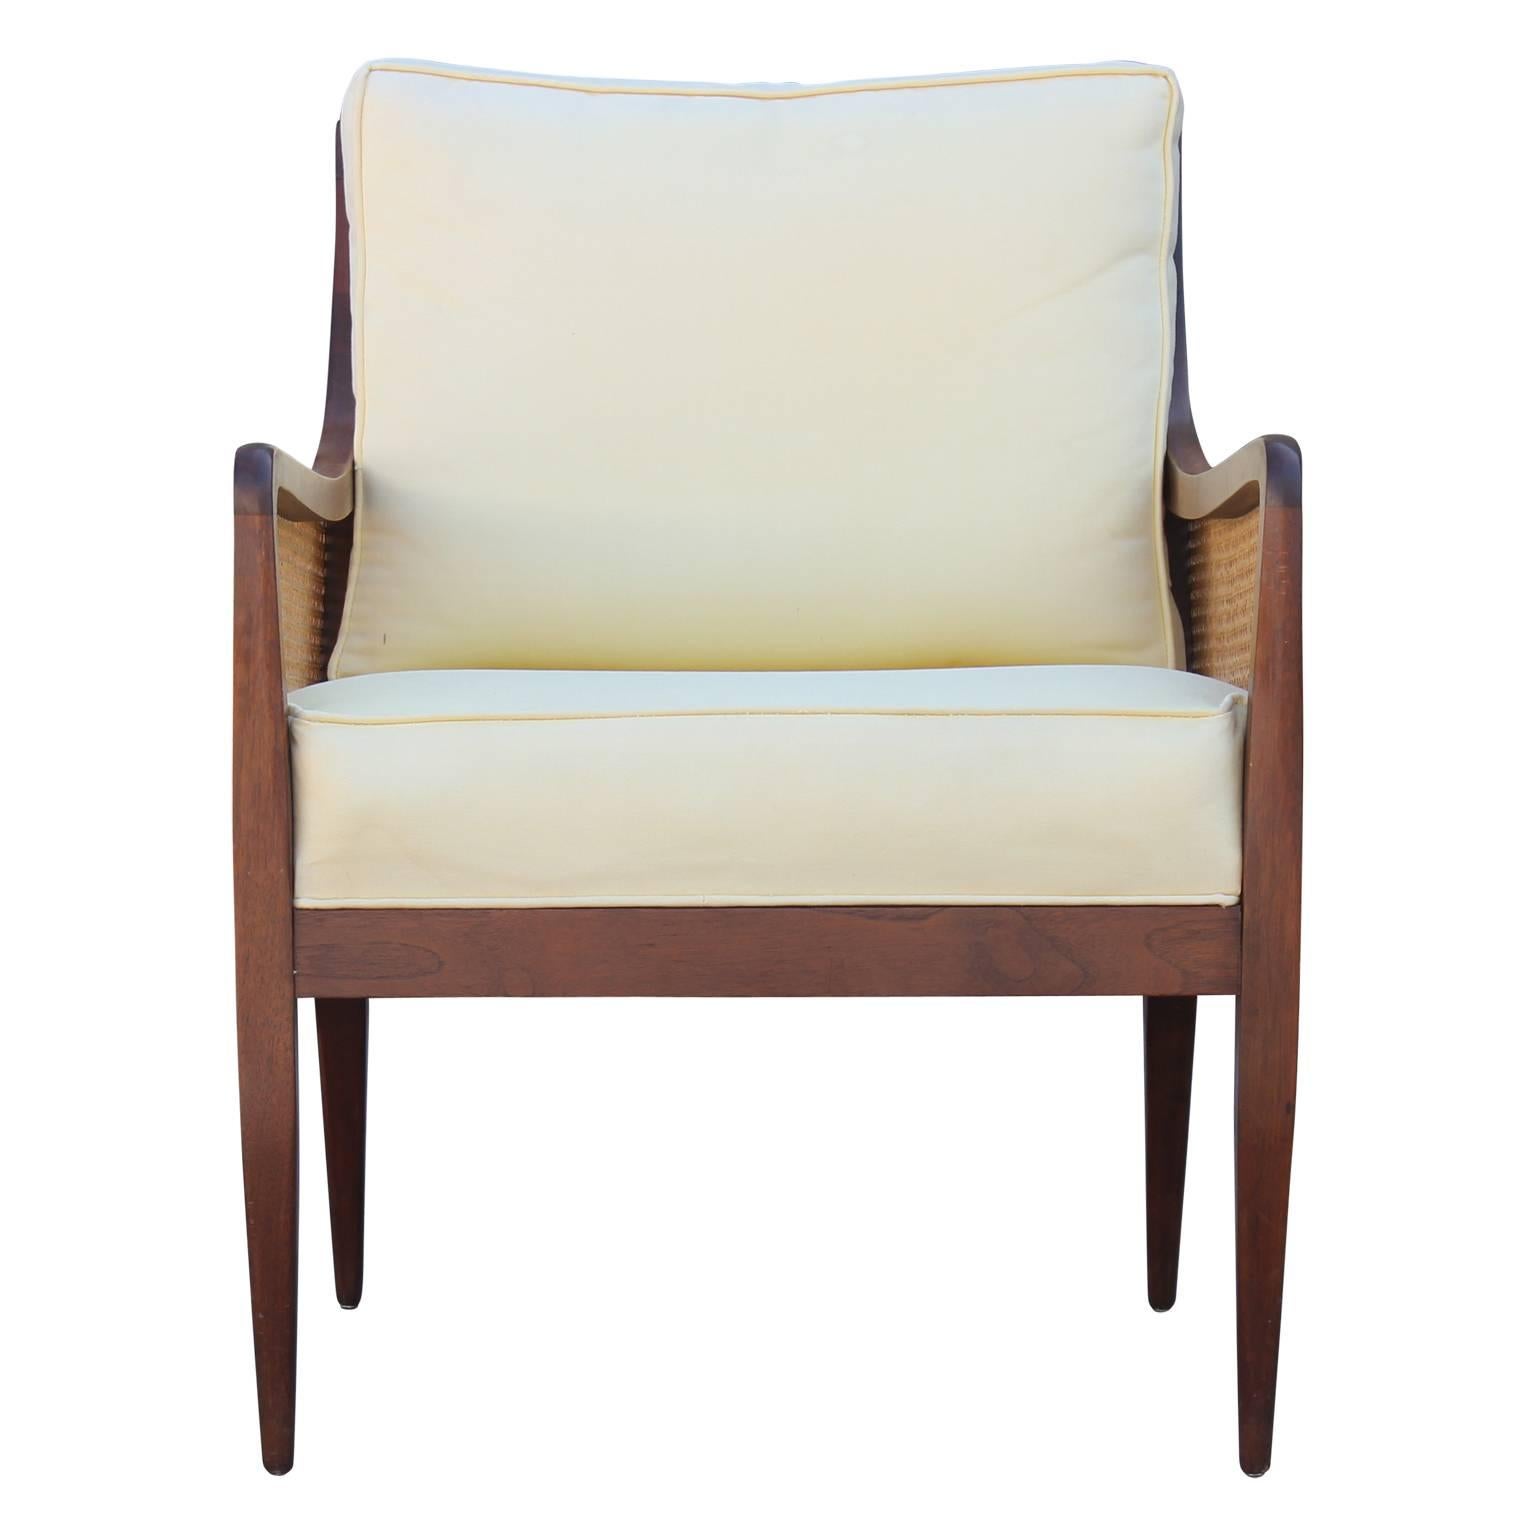 Gorgeous pair of Kipp Stewart cane back walnut lounge chairs as part of Directional's Country Villa collection. The cane is in excellent condition. Cushions are in the original fabric and would need to be redone.